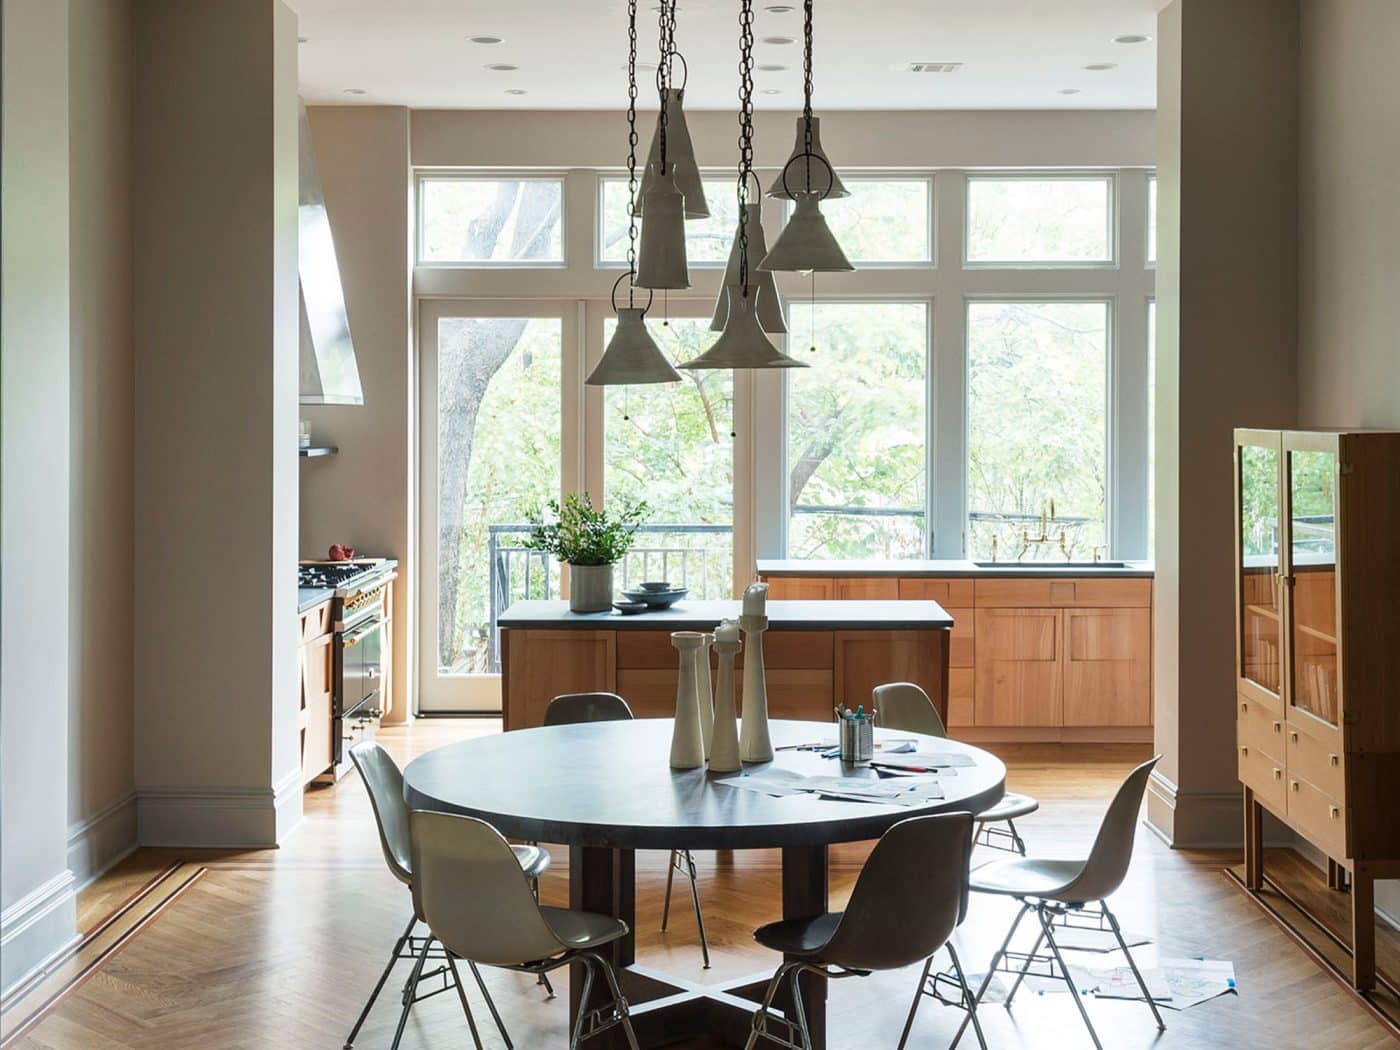 Dining area with view into windowed kitchen of Boerum Hill Brooklyn townhouse home designed by Workstead